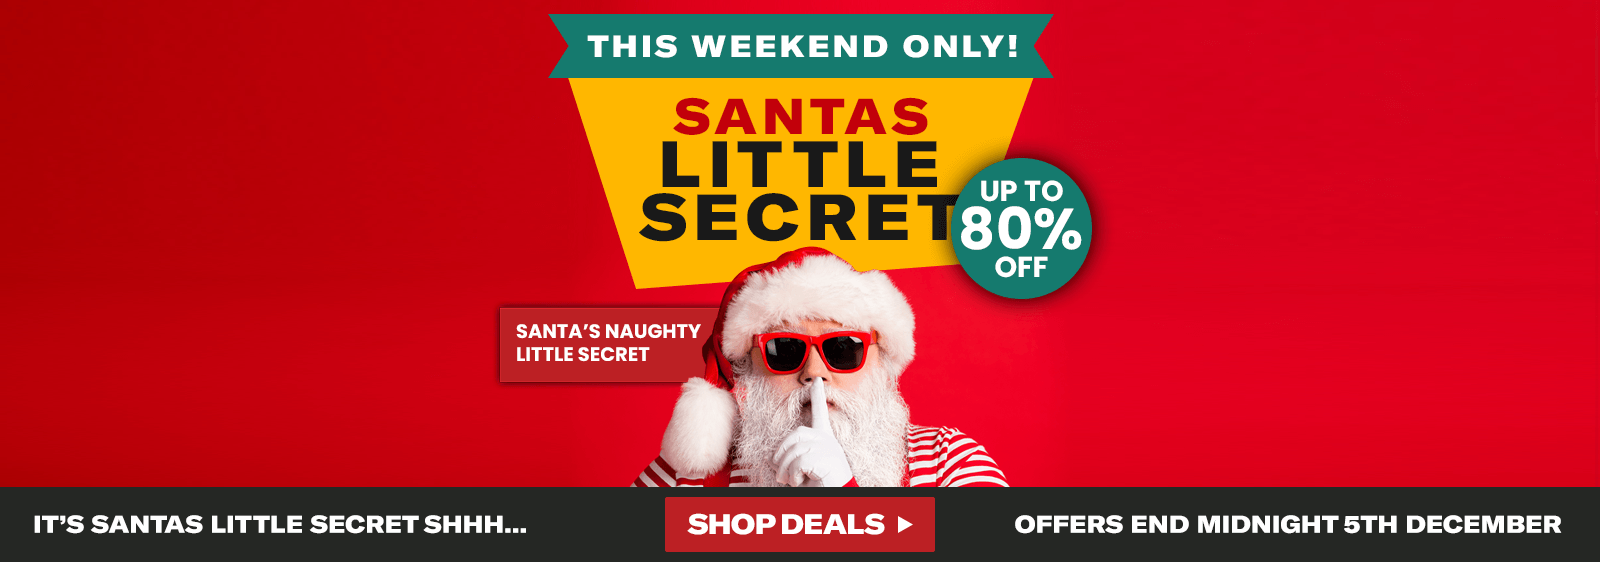 Up to 80% OFF toys, gaming, clothing & more from Santas Little Secret Sale @ Ozgameshop